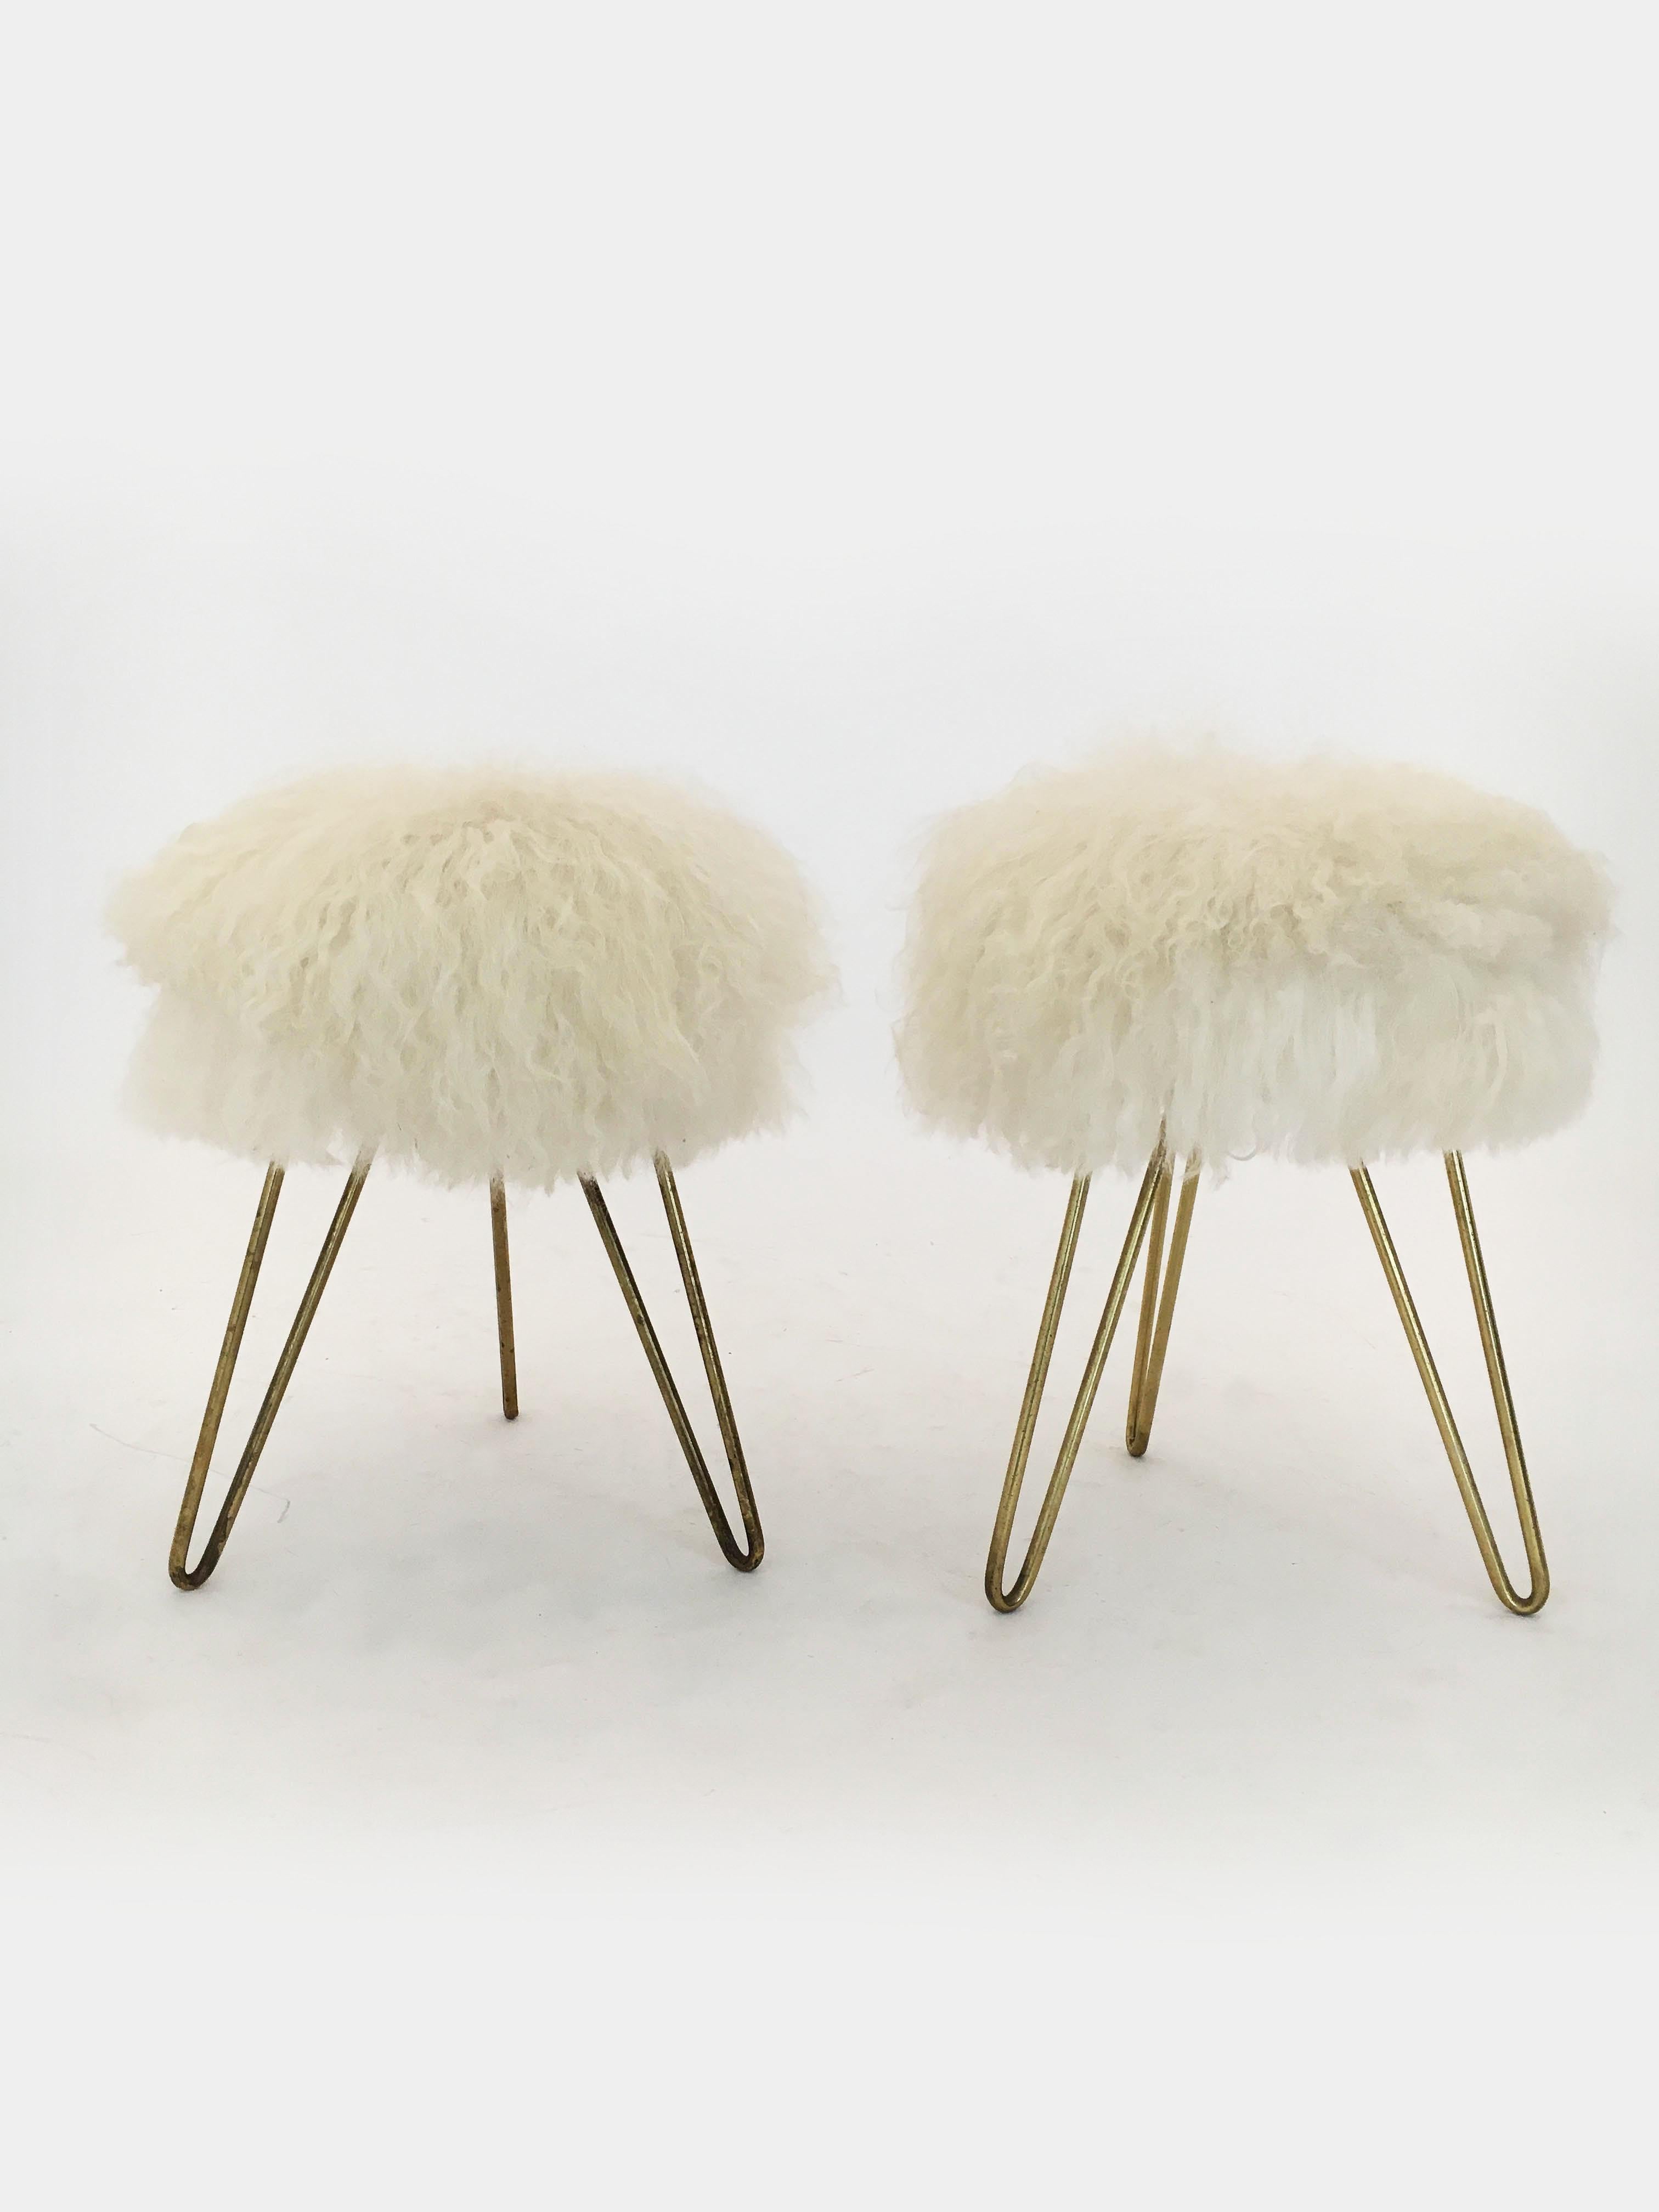 Pair of Sheep Fur Stools, France, 1950s For Sale 2